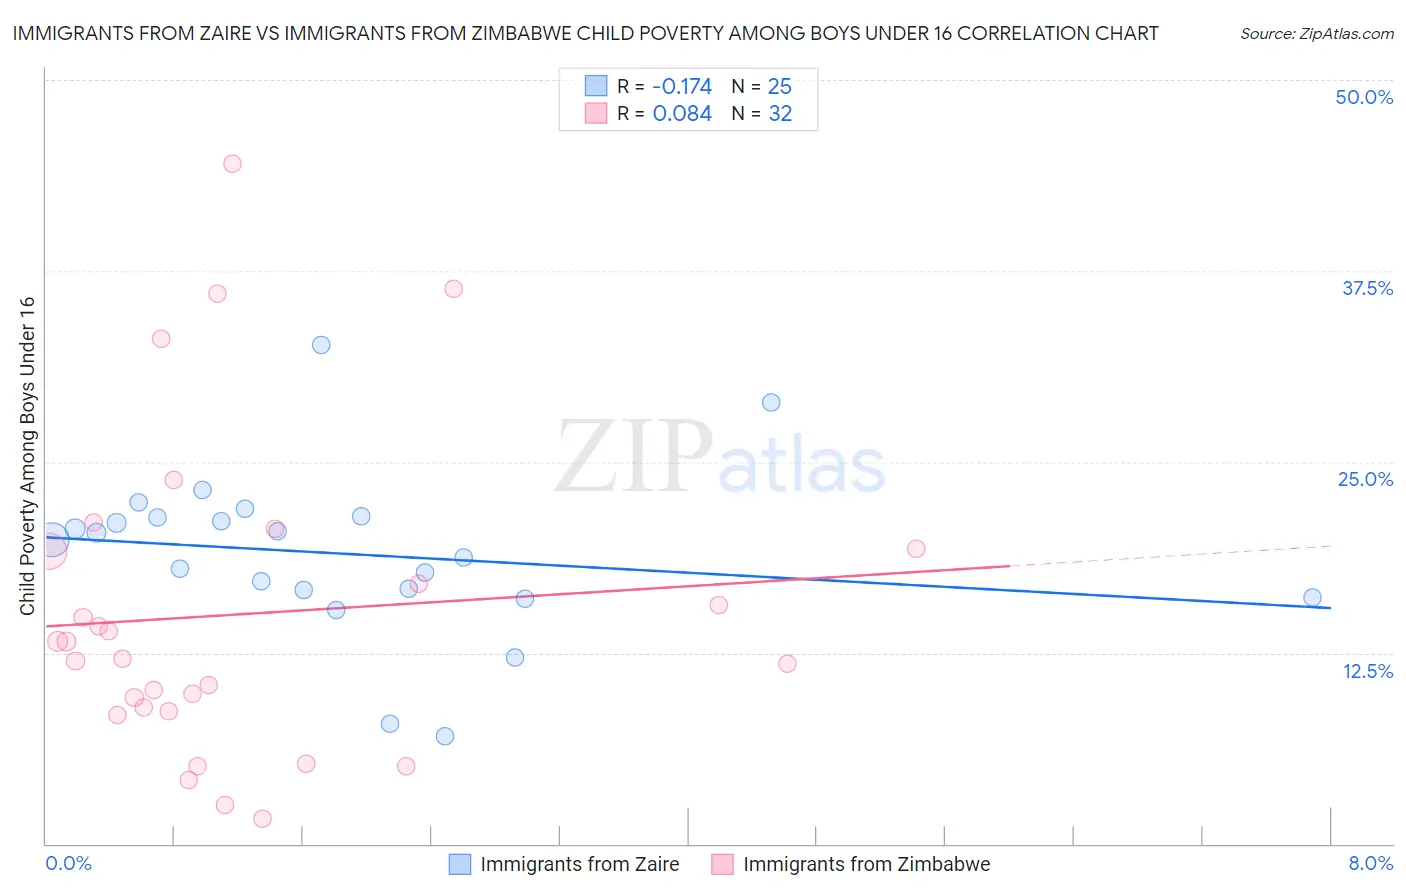 Immigrants from Zaire vs Immigrants from Zimbabwe Child Poverty Among Boys Under 16